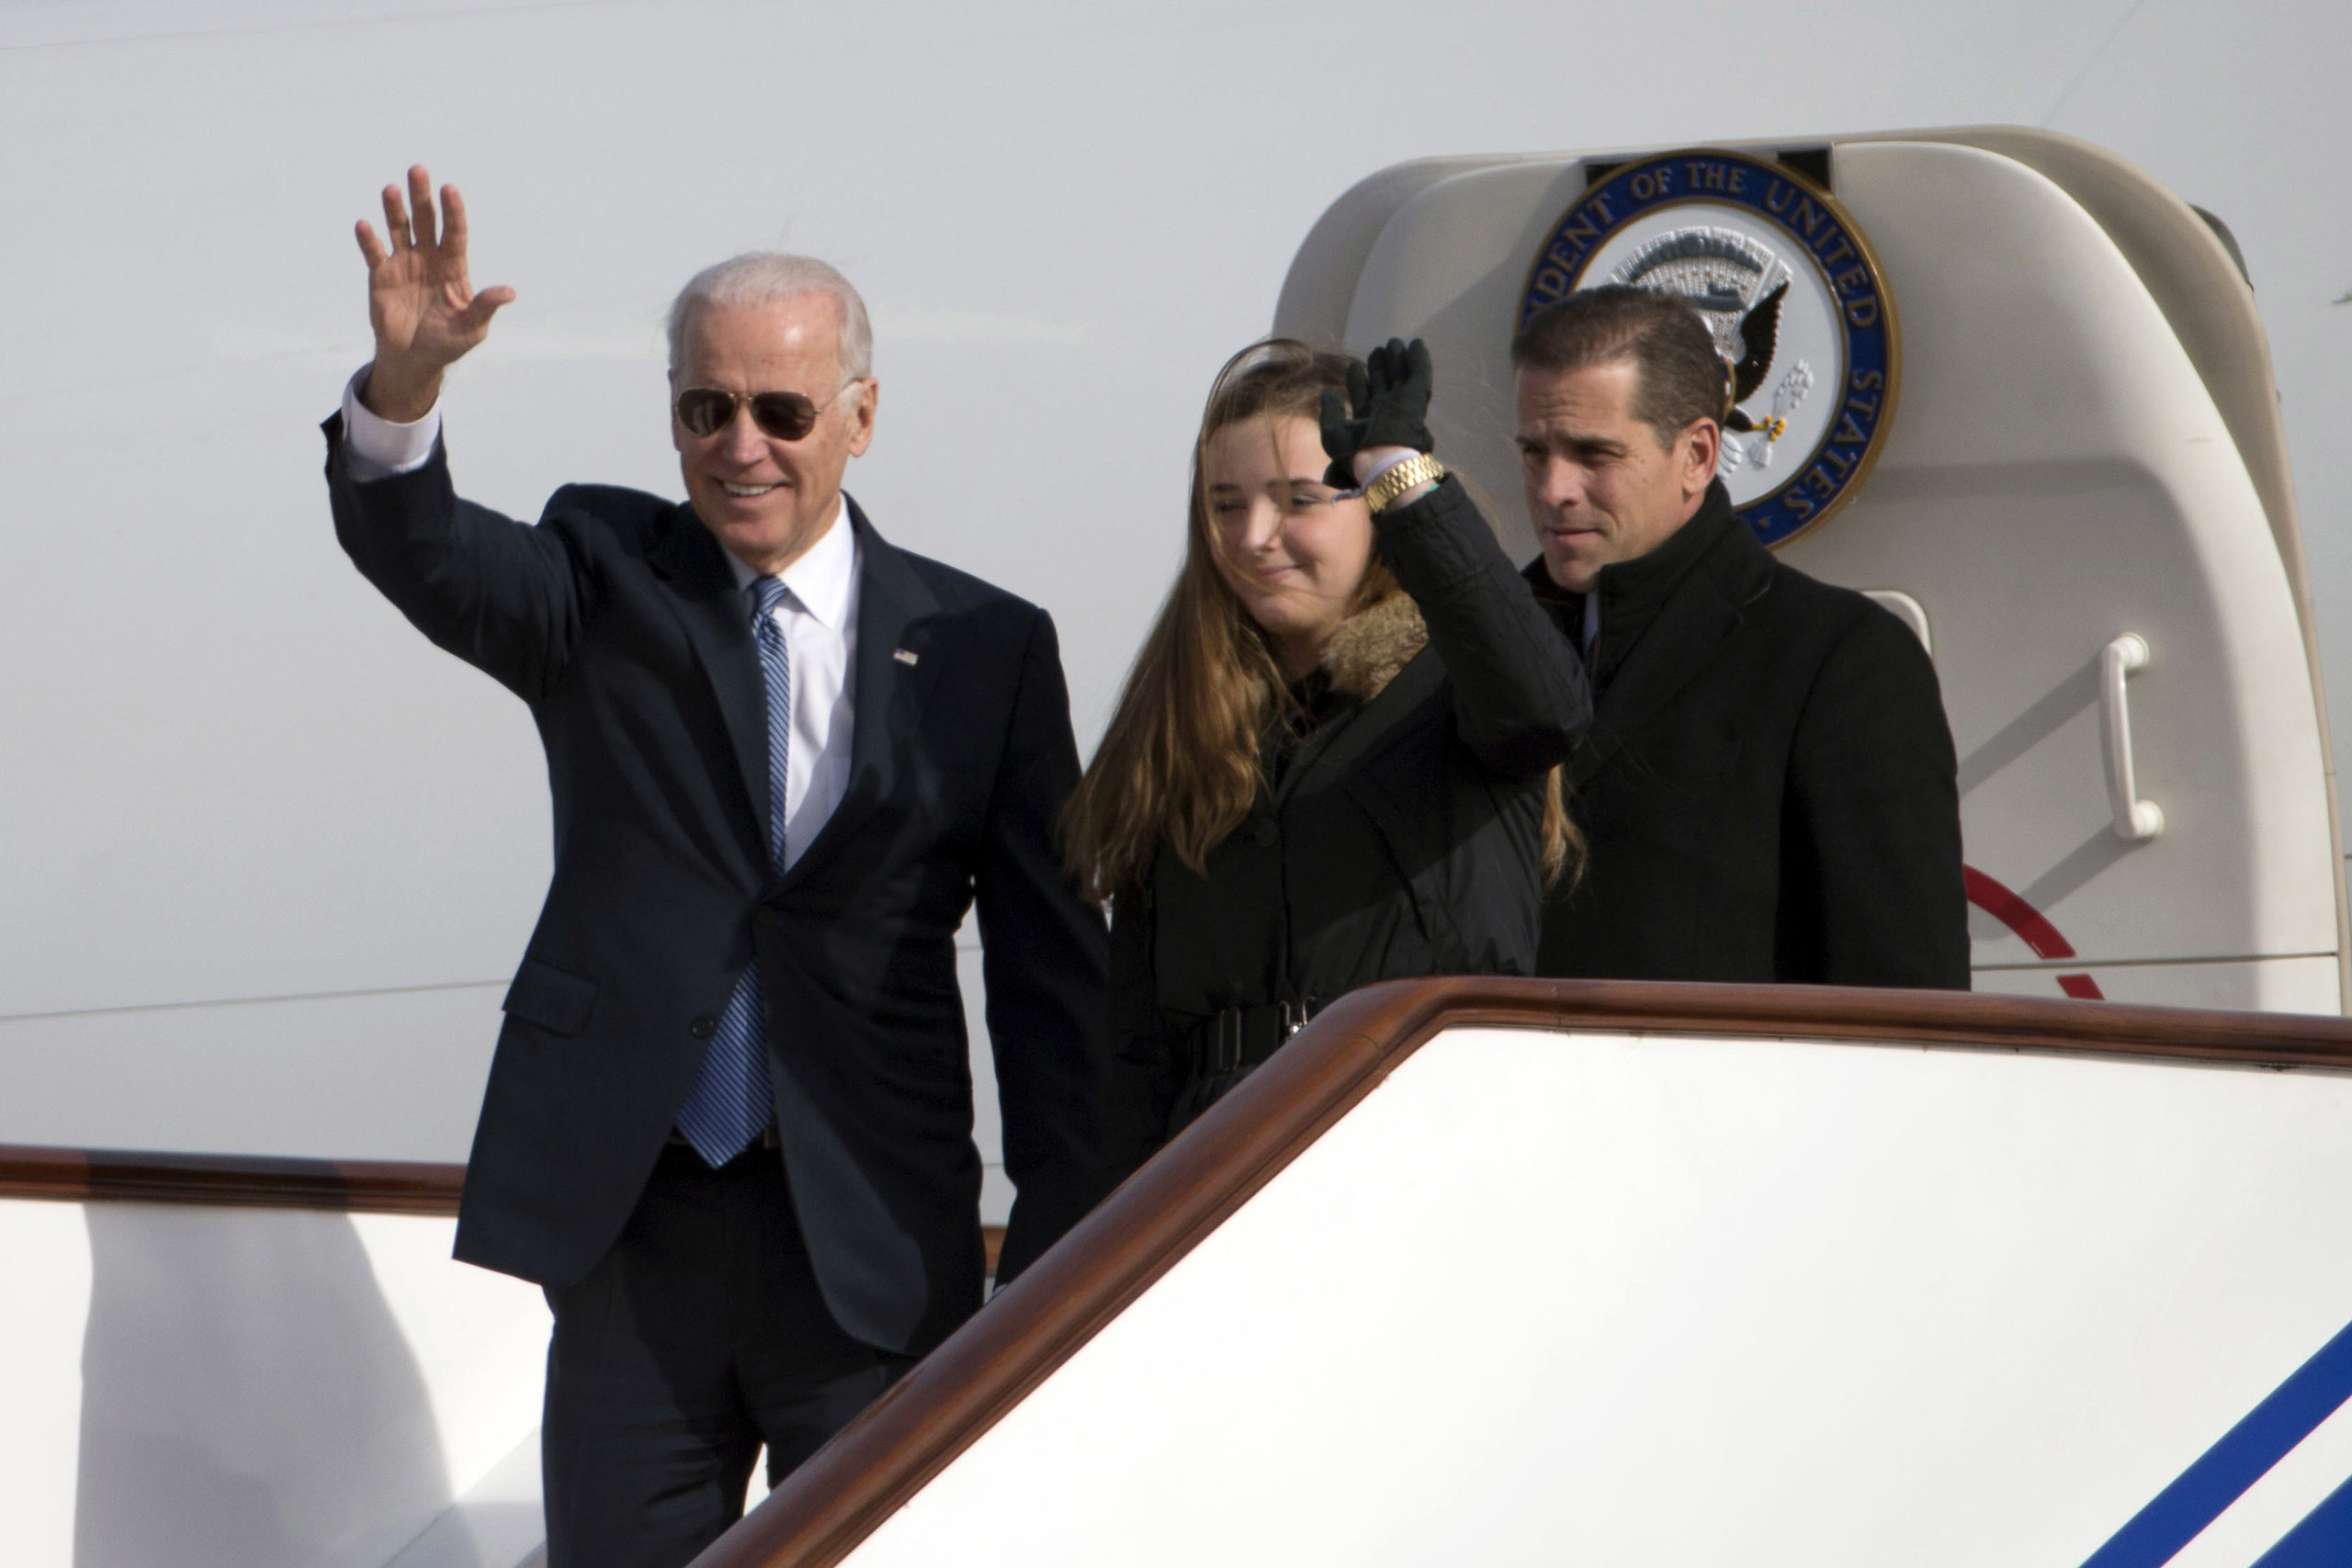 BEIJING, CHINA - DECEMBER 04: U.S. Vice President Joe Biden waves as he walks out of Air Force Two with his granddaughter Finnegan Biden and son Hunter Biden (R) on December 4, 2013 in Beijing, China. Biden is on the first leg of his week-long visit to Asia. (Ng Han Guan-Pool/Getty Images)